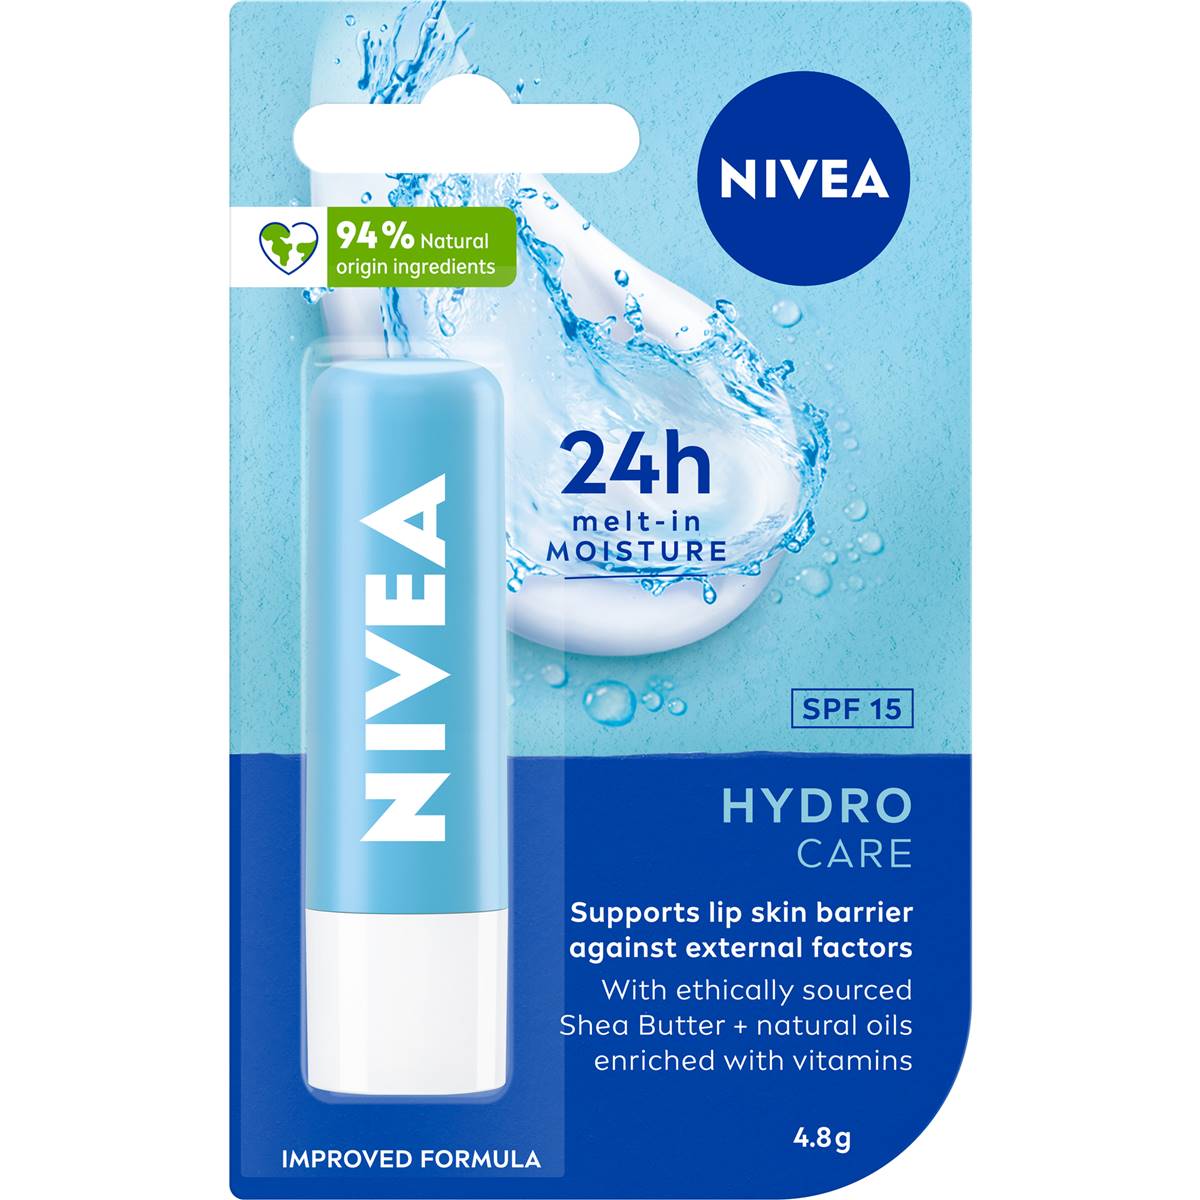 nivea soothing care lip balm review